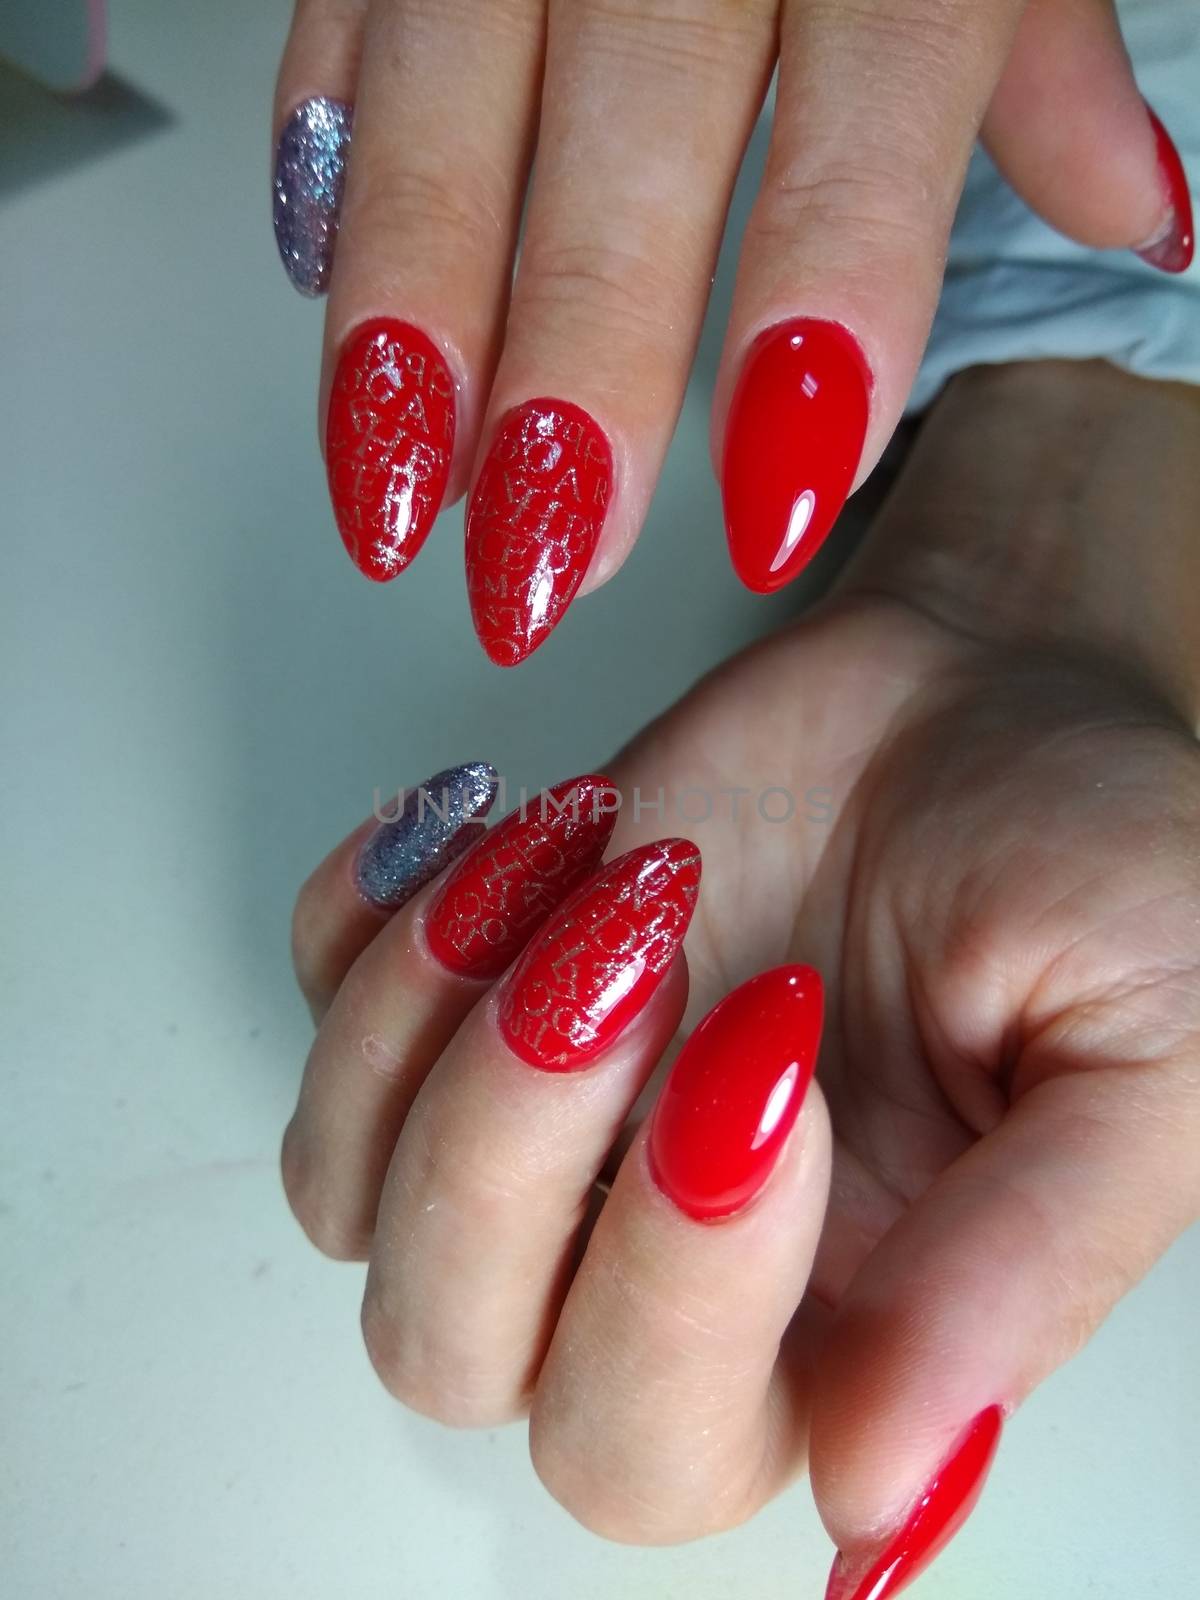 Here is presented one of the best manicure designs this year's Nail Red